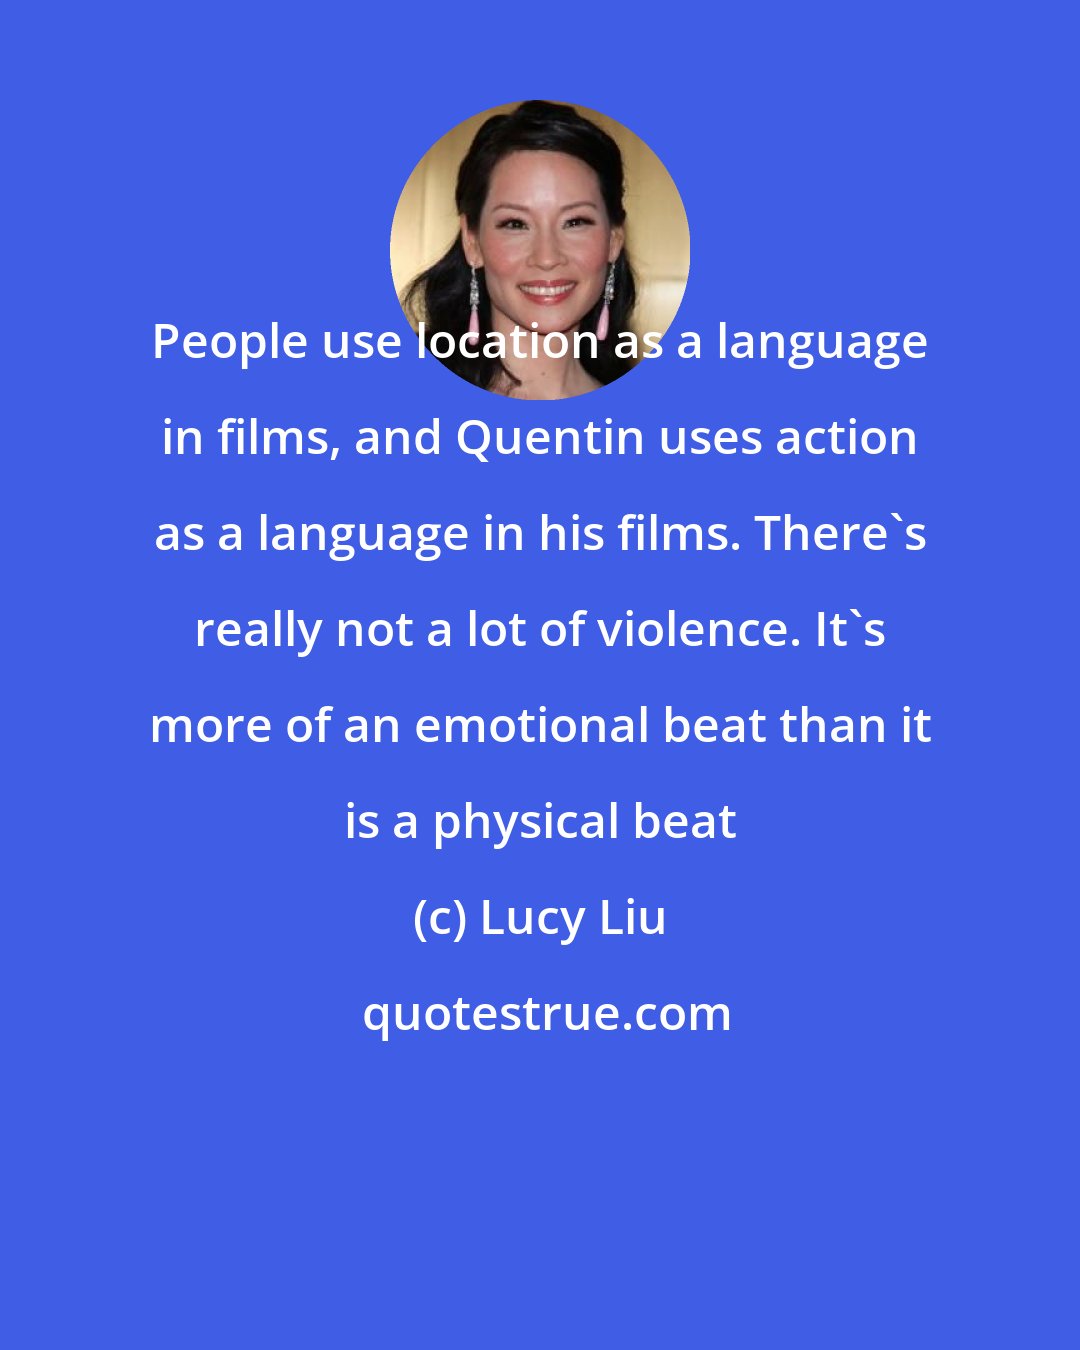 Lucy Liu: People use location as a language in films, and Quentin uses action as a language in his films. There's really not a lot of violence. It's more of an emotional beat than it is a physical beat